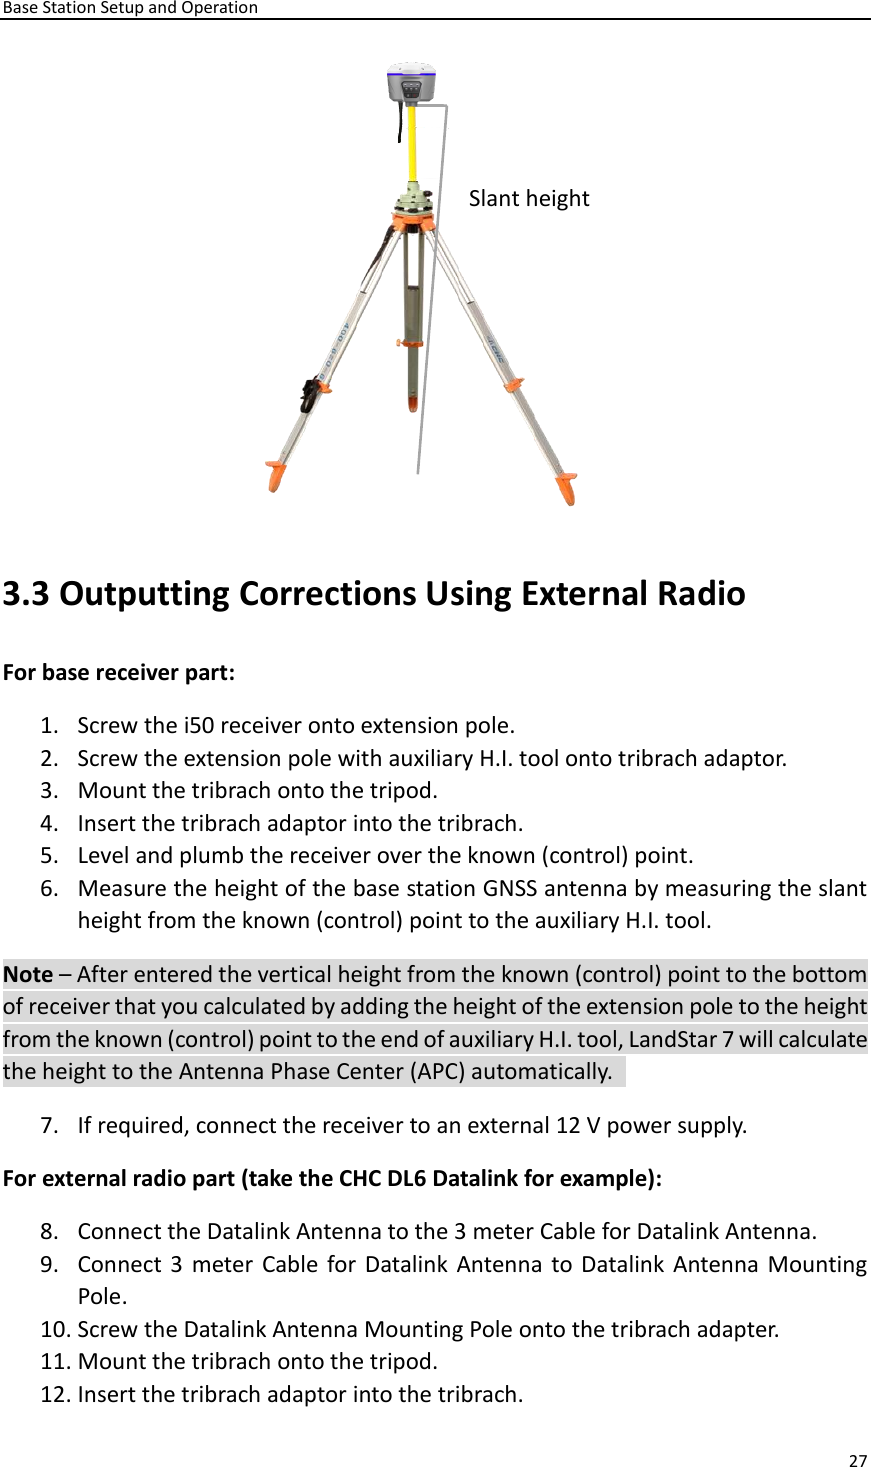 Base Station Setup and Operation 27   3.3 Outputting Corrections Using External Radio For base receiver part:   1. Screw the i50 receiver onto extension pole.   2. Screw the extension pole with auxiliary H.I. tool onto tribrach adaptor.   3. Mount the tribrach onto the tripod.   4. Insert the tribrach adaptor into the tribrach.   5. Level and plumb the receiver over the known (control) point. 6. Measure the height of the base station GNSS antenna by measuring the slant height from the known (control) point to the auxiliary H.I. tool. Note – After entered the vertical height from the known (control) point to the bottom of receiver that you calculated by adding the height of the extension pole to the height from the known (control) point to the end of auxiliary H.I. tool, LandStar 7 will calculate the height to the Antenna Phase Center (APC) automatically.   7. If required, connect the receiver to an external 12 V power supply.   For external radio part (take the CHC DL6 Datalink for example):   8. Connect the Datalink Antenna to the 3 meter Cable for Datalink Antenna.   9. Connect 3  meter Cable for Datalink Antenna to Datalink Antenna  Mounting Pole. 10. Screw the Datalink Antenna Mounting Pole onto the tribrach adapter.   11. Mount the tribrach onto the tripod.   12. Insert the tribrach adaptor into the tribrach.   Slant height 